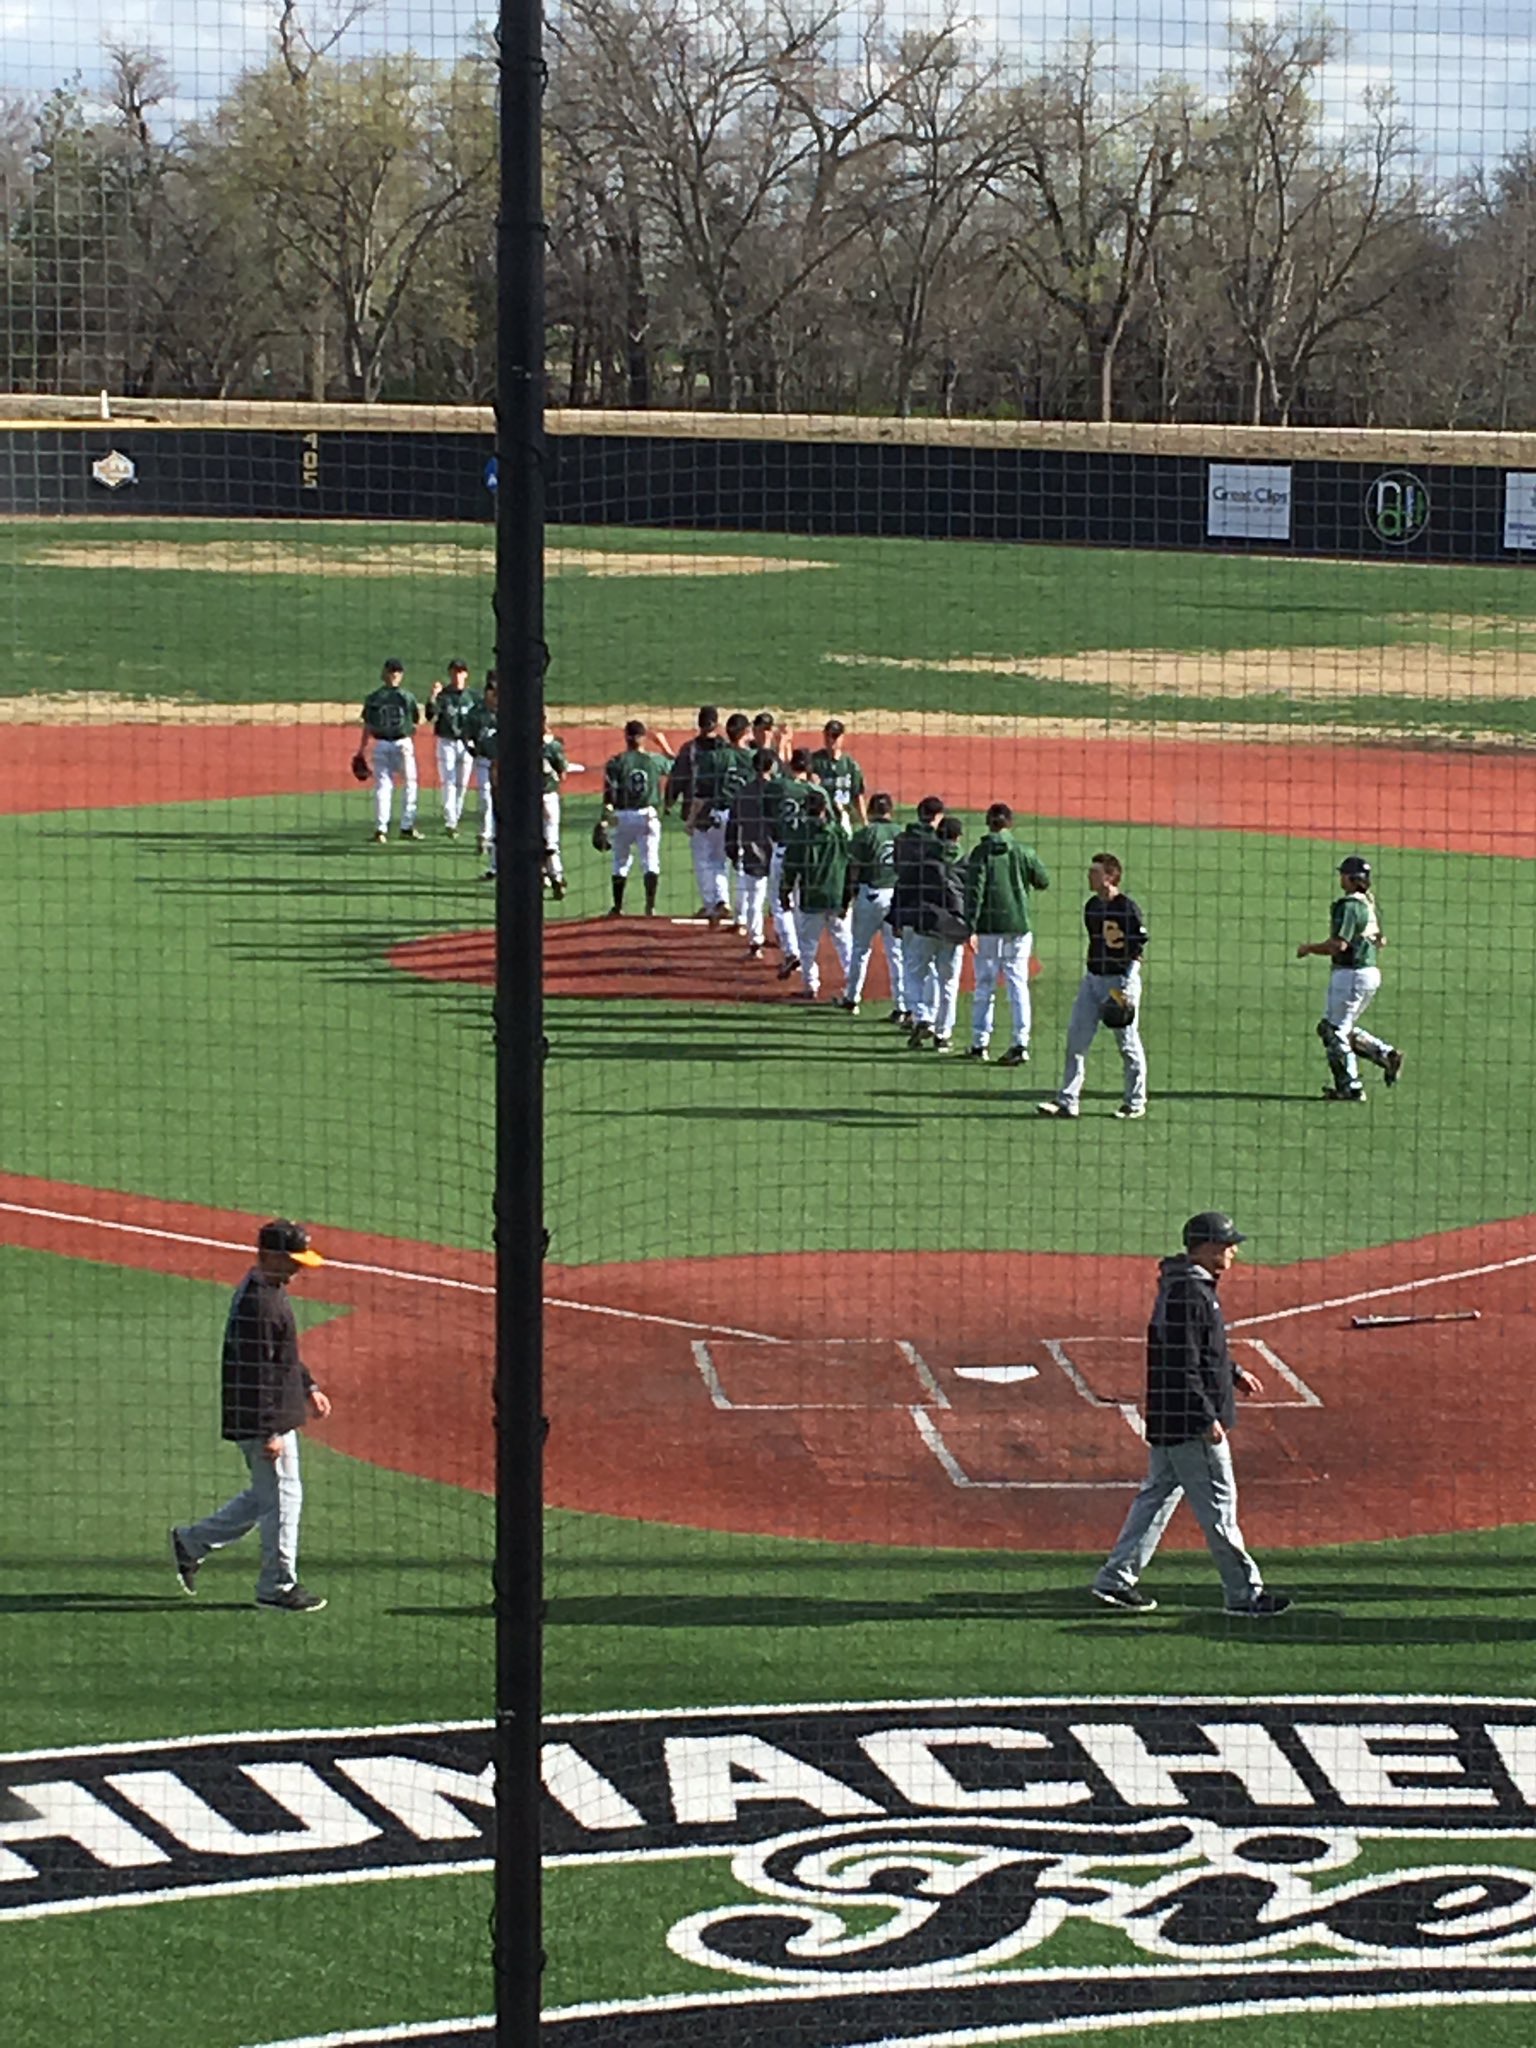 Saints Win First Conference Series